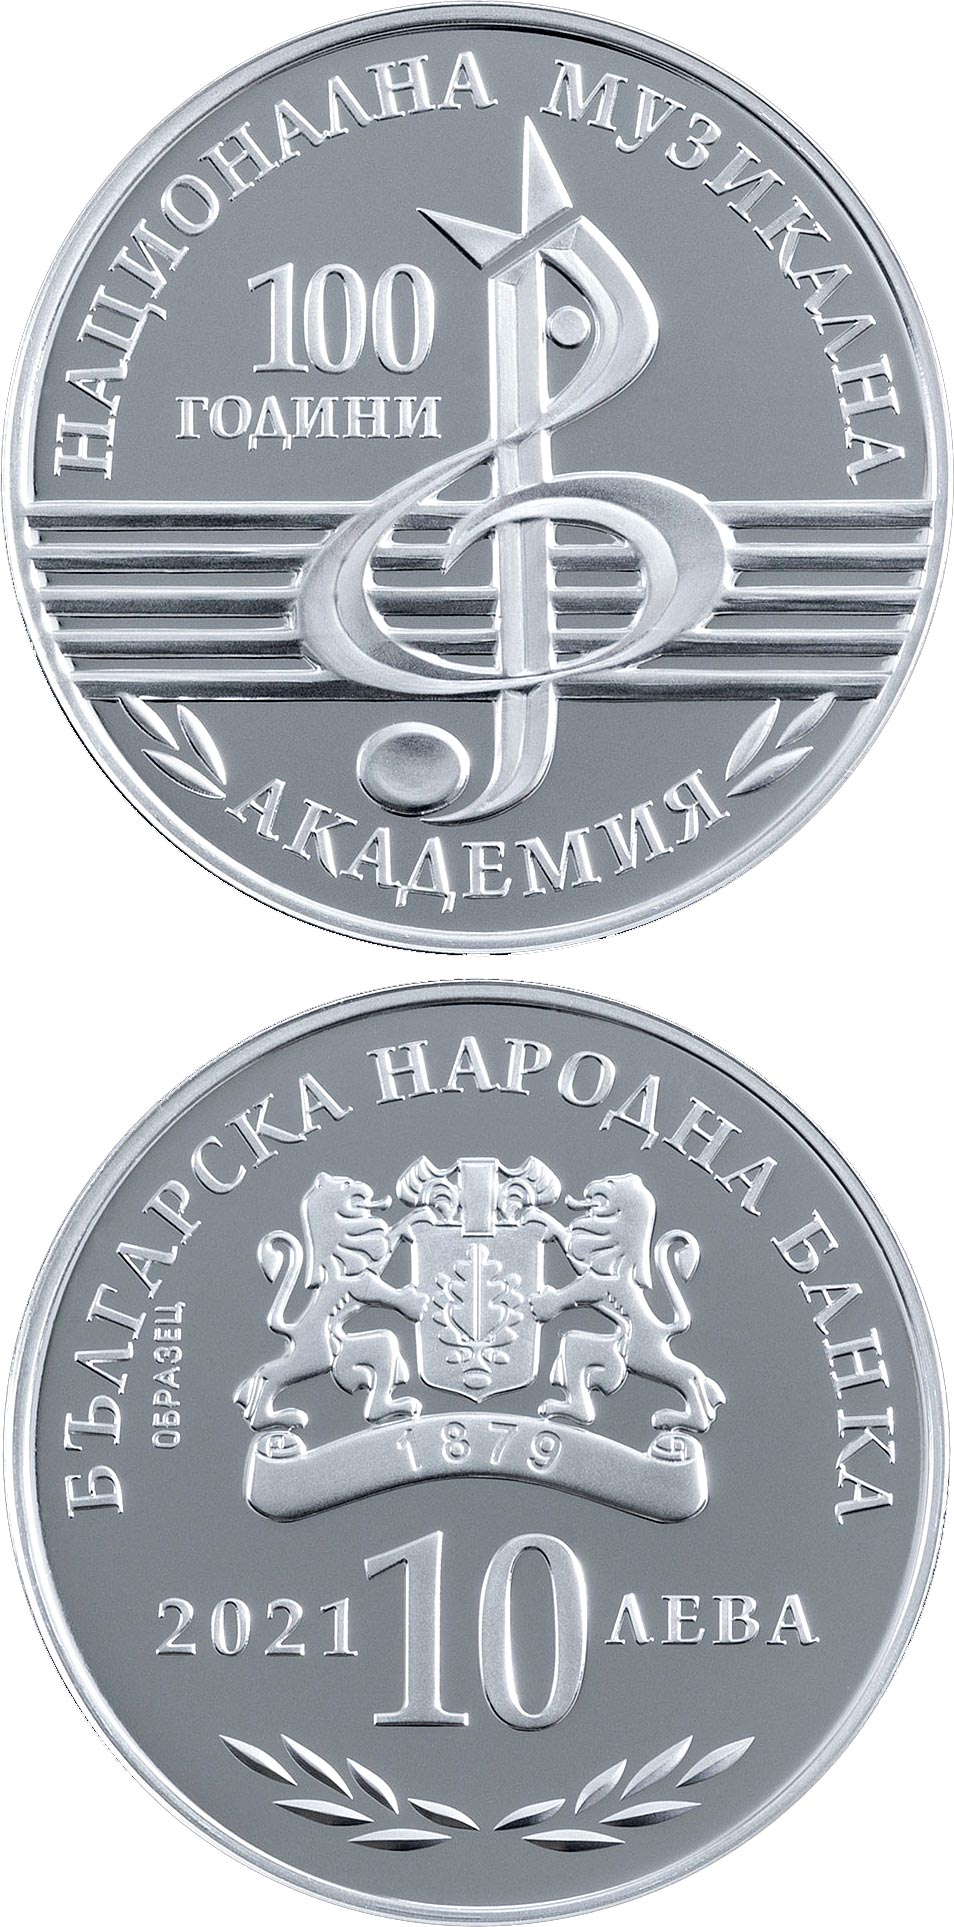 Image of 10 lev  coin - 100 Years of National Academy of Music | Bulgaria 2021.  The Bimetal: gold, silver coin is of Proof quality.